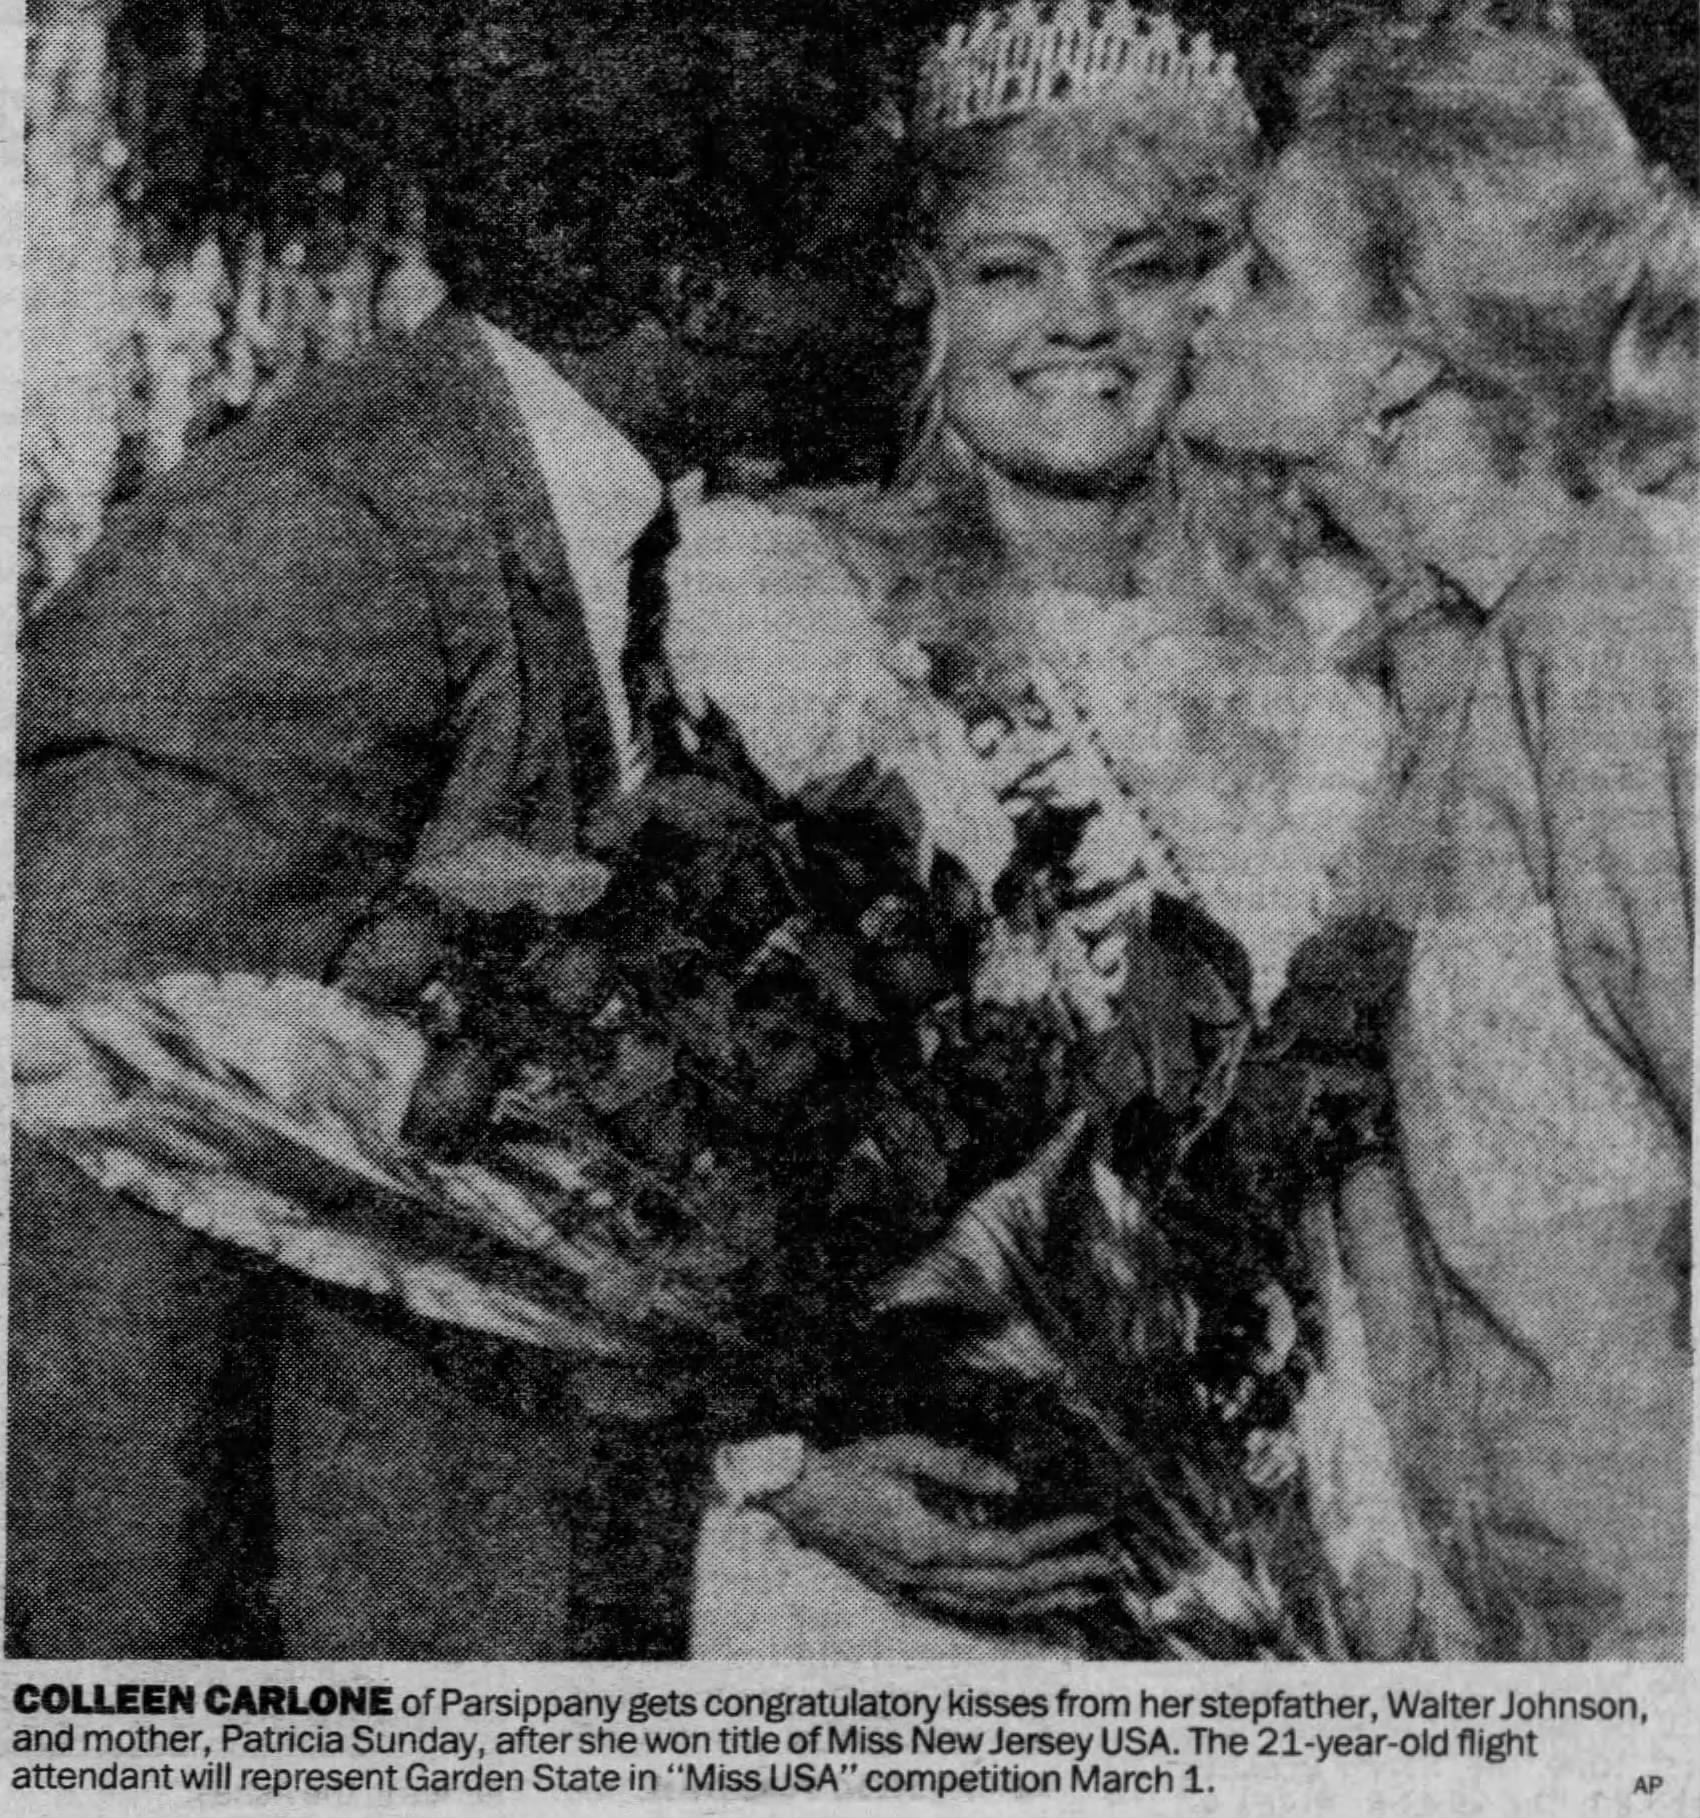 Colleen Carlone is crowned Miss New Jersey USA 1988